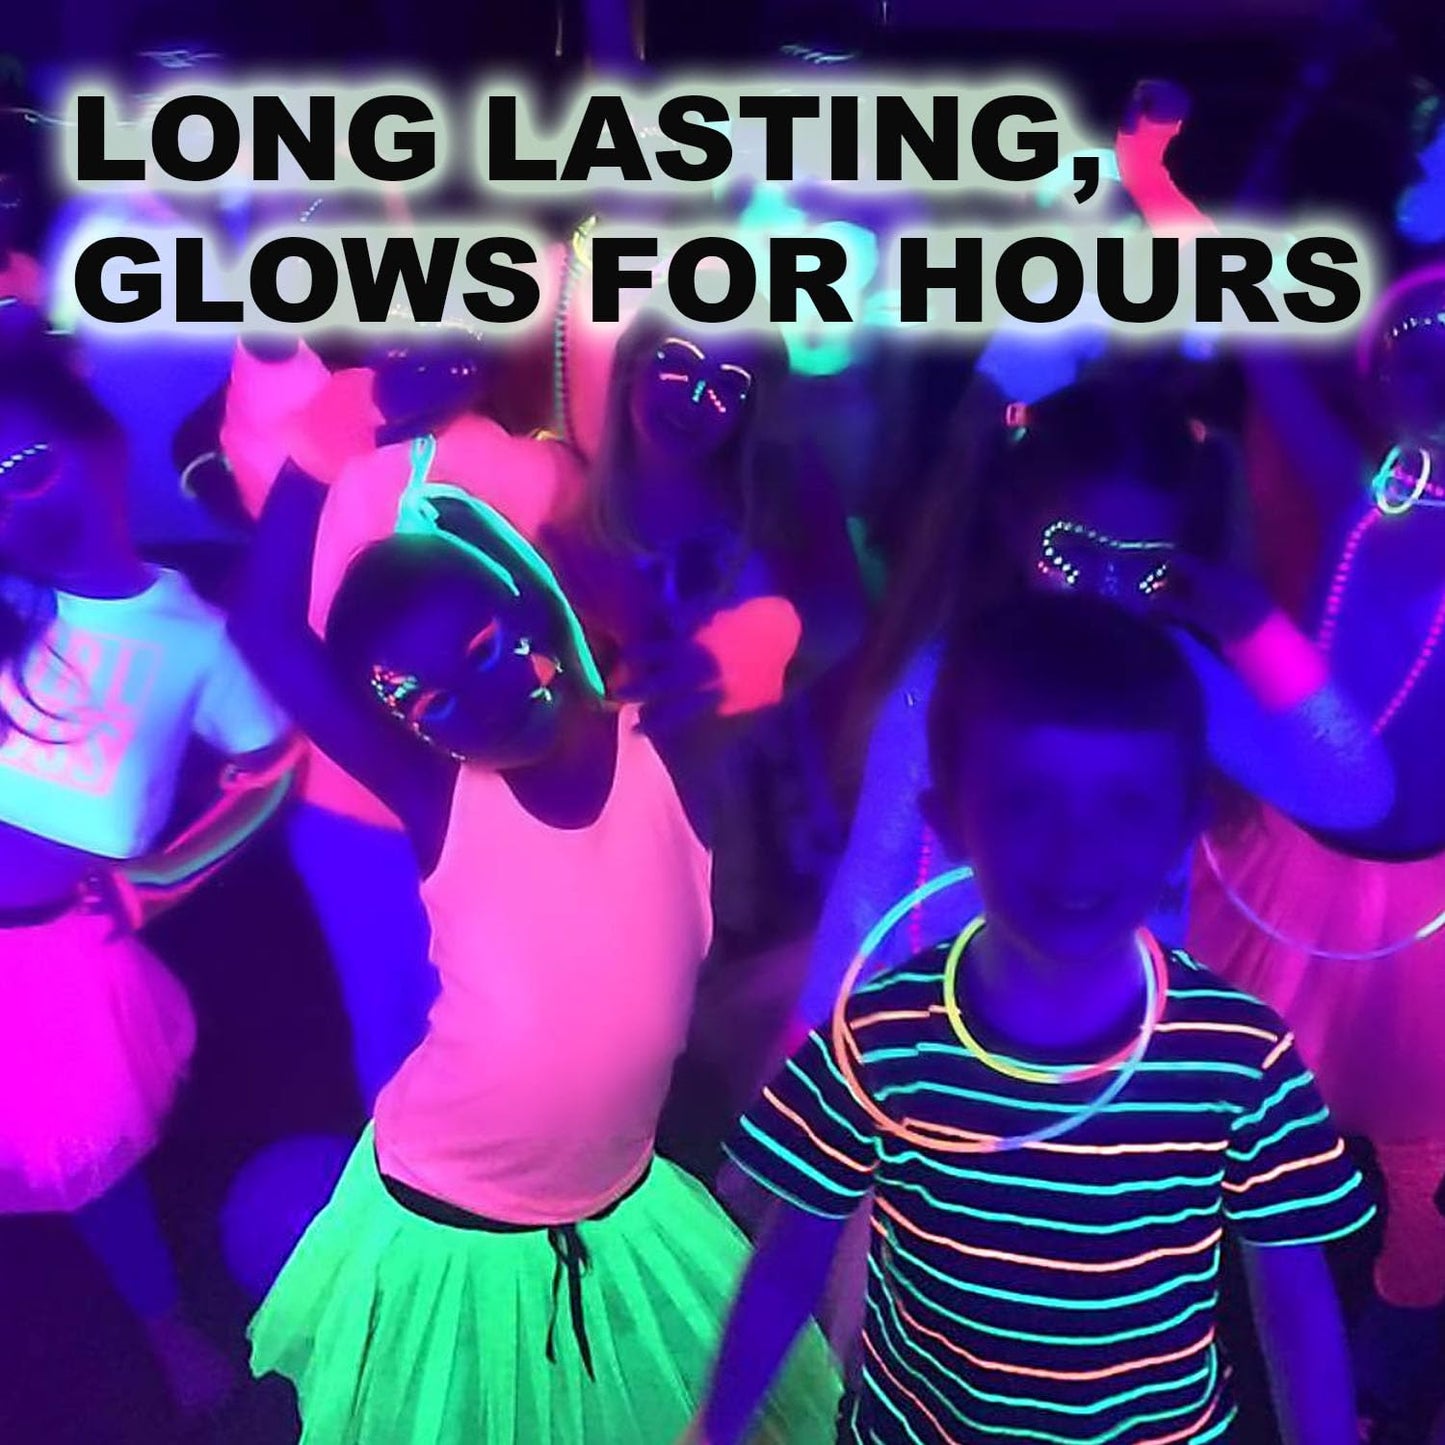 Glow Sticks - Assorted Brightly Coloured Luminous Party Sticks, Available in 6 Colours, Neon UV Accessories, Hanging Chord Included, Glow in the Dark Light Sticks (6 Pack, 6'' Glow Sticks)